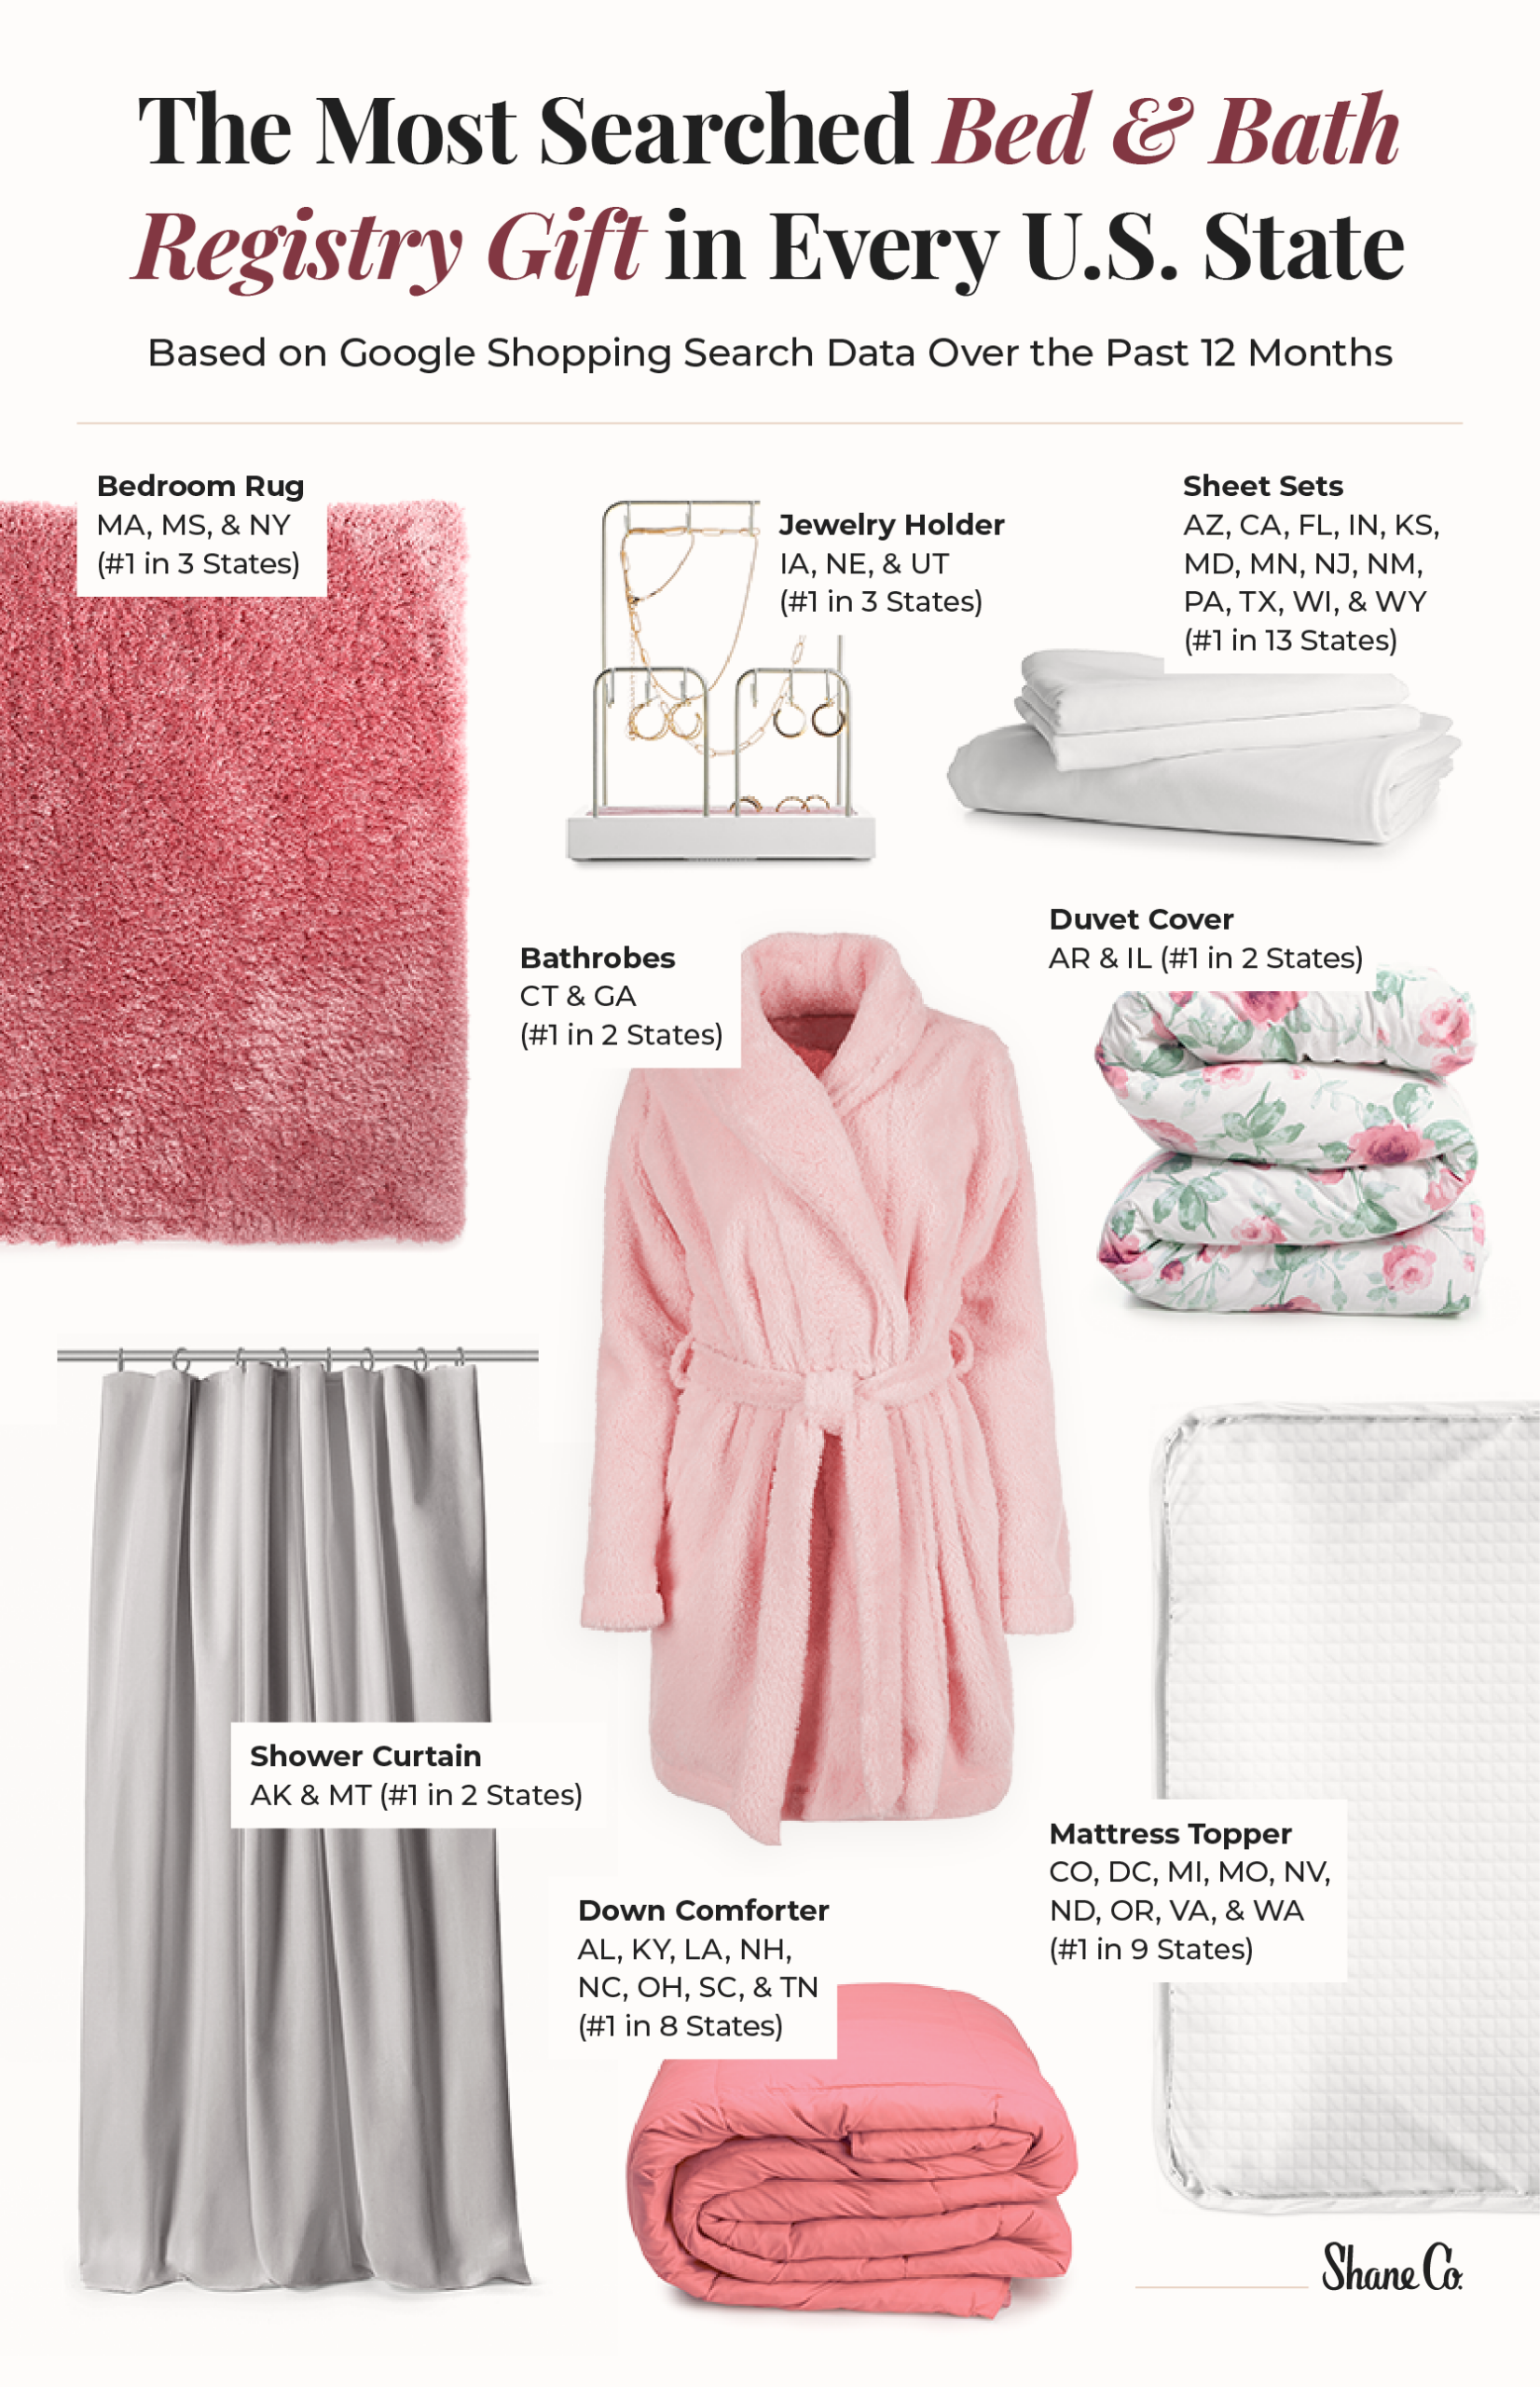 Top 10 Wedding Registry Gifts from Bed Bath & Beyond—Blueprint Guides